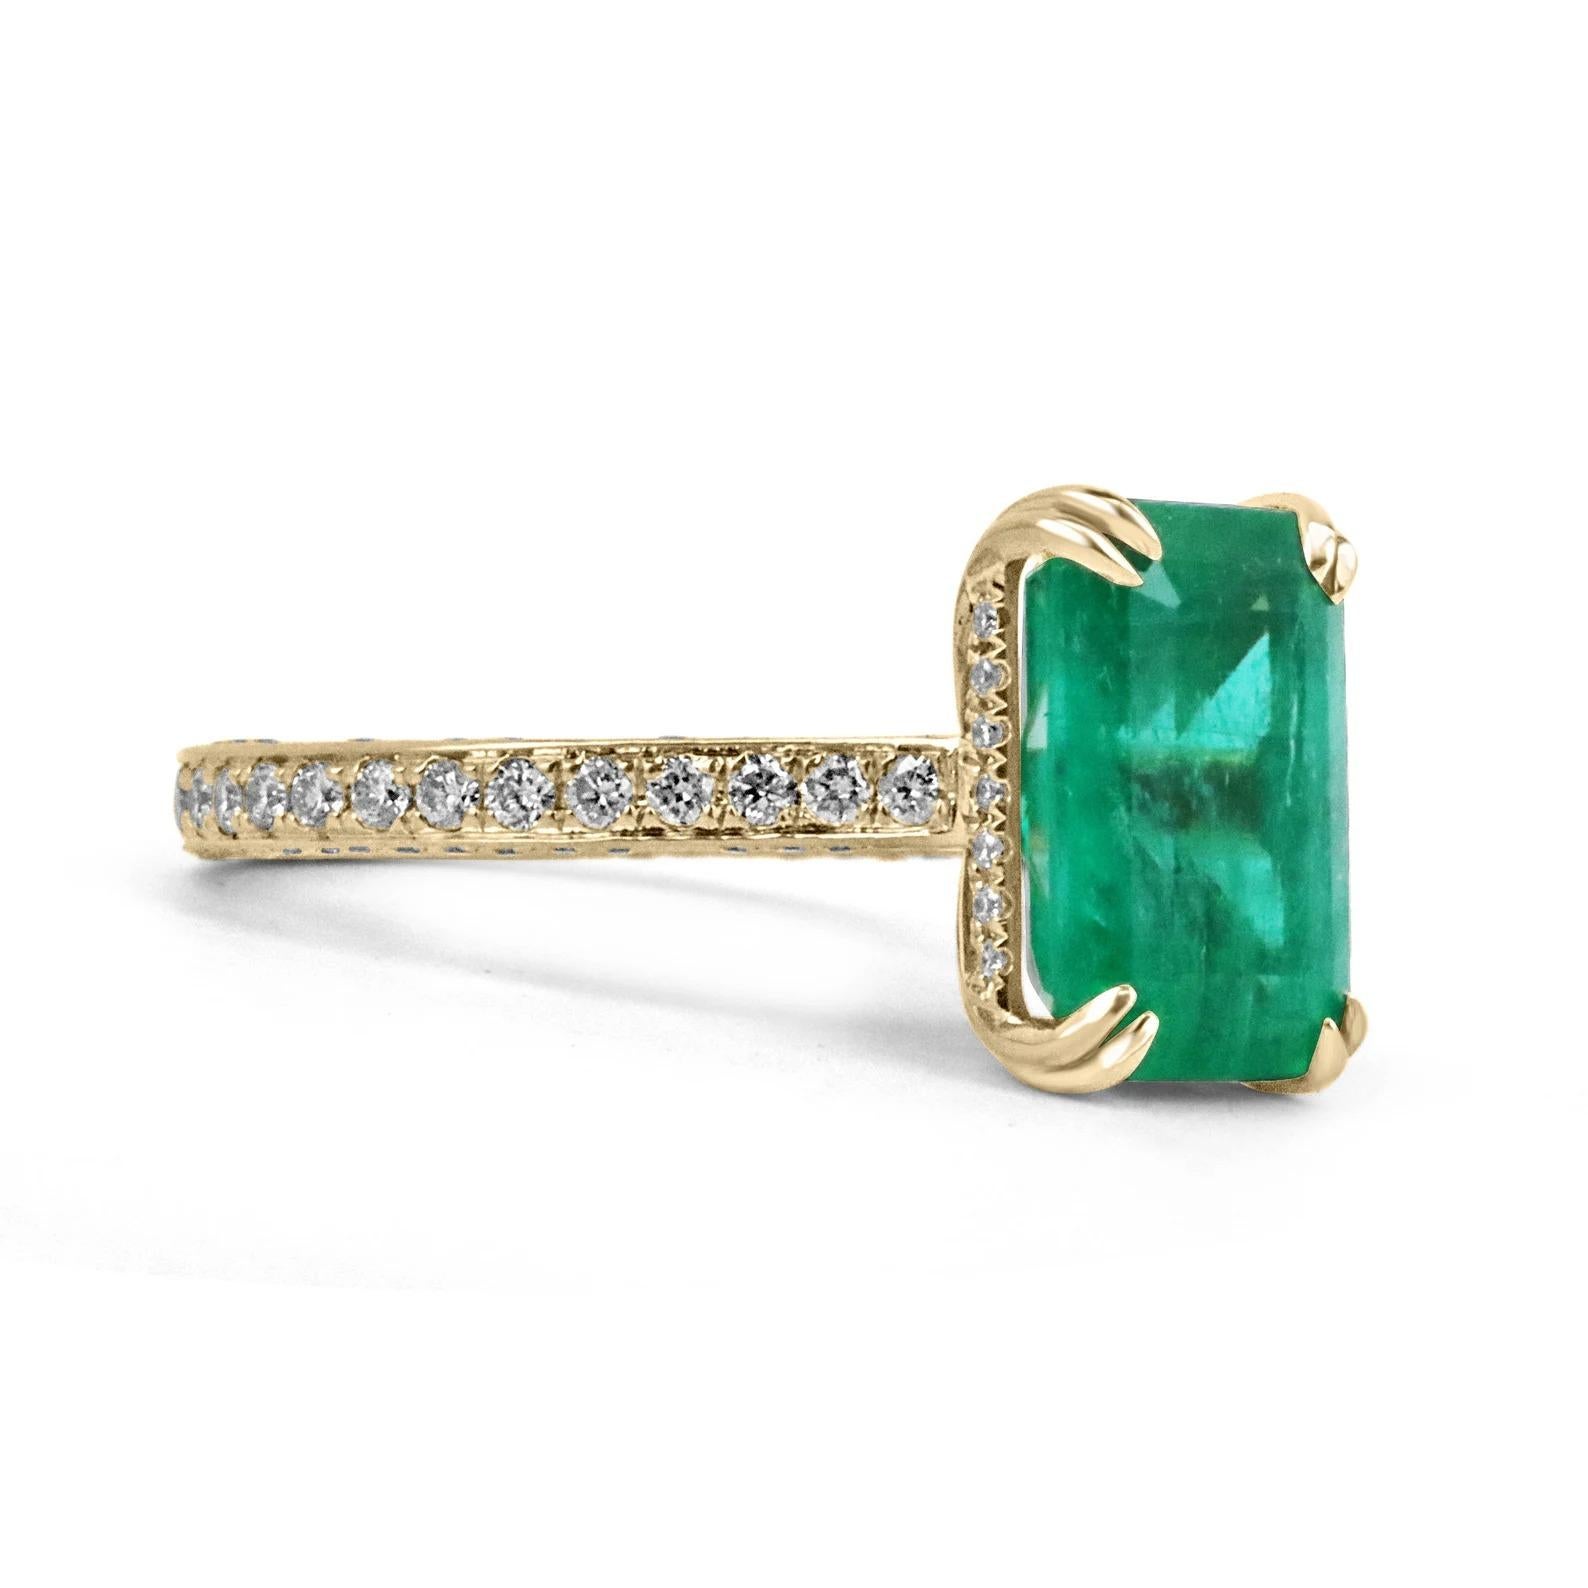 Elegantly displayed is a natural, emerald-cut AAA Colombian emerald and diamond shank ring. The center gem is a deep green, natural emerald filled with life, color, and brilliance! Among the emeralds, impressive qualities are its vibrant color and